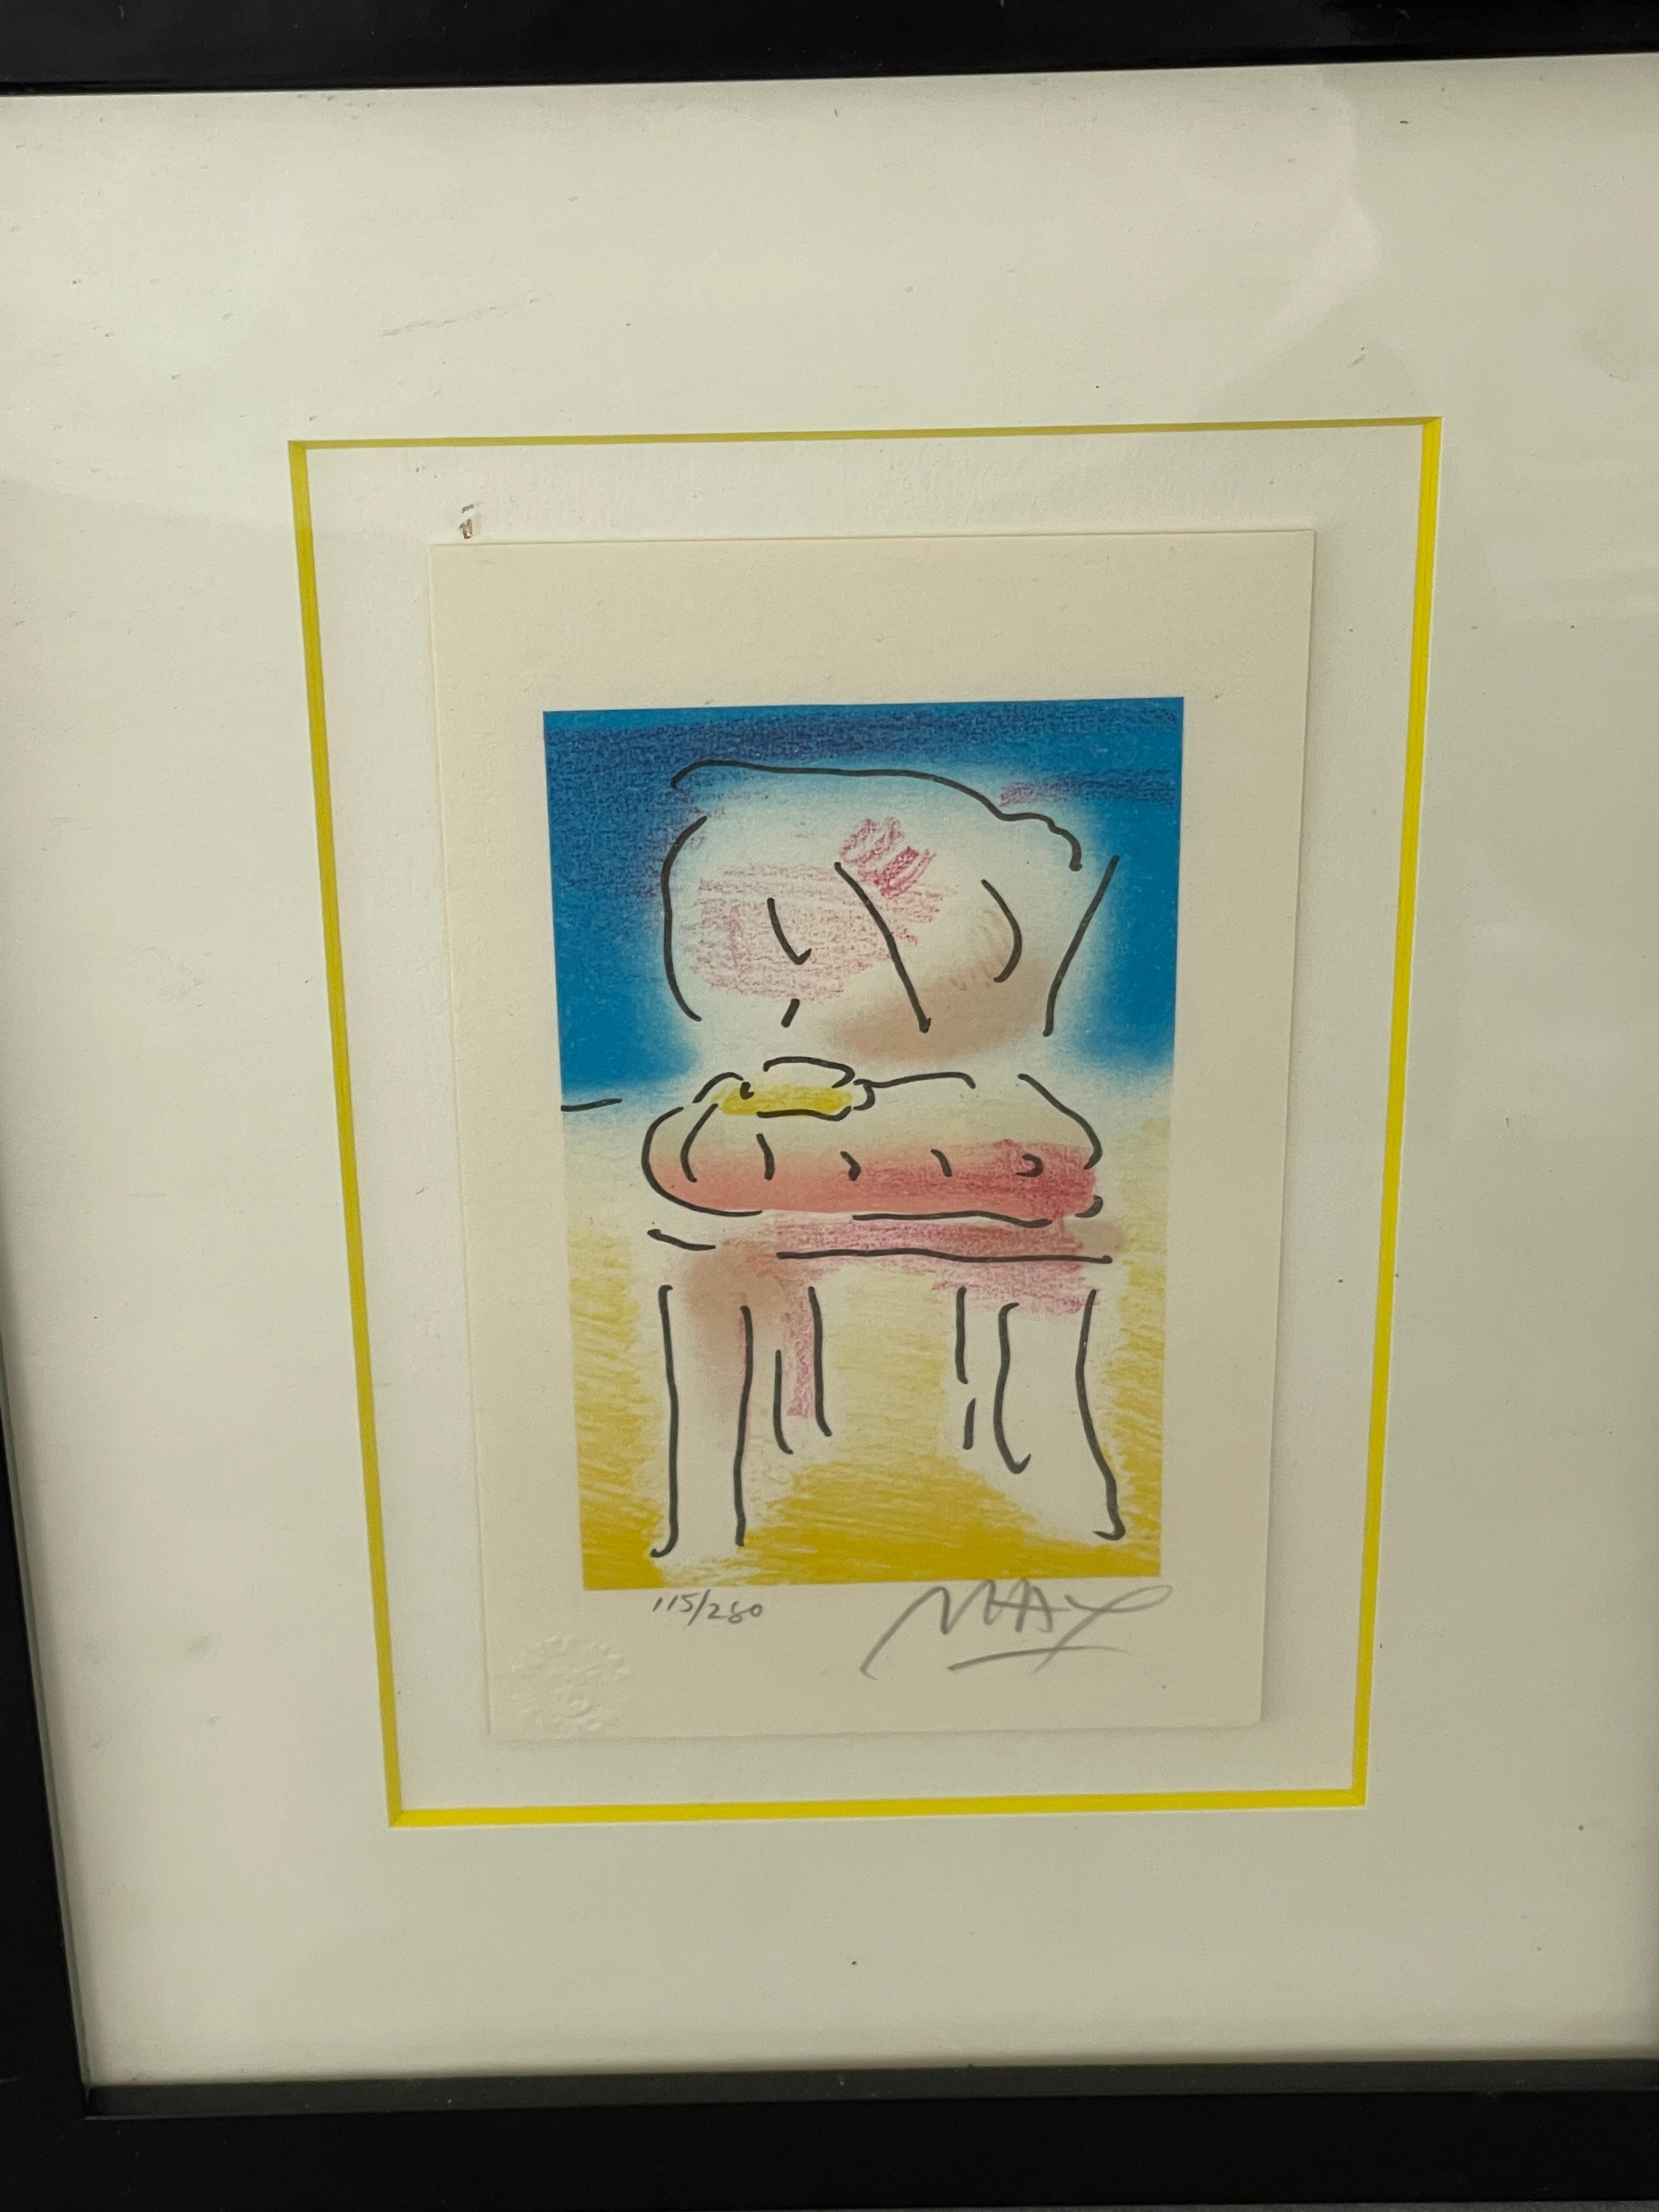 Peter Max 'Old Chair' Lithograph with Stamp Signed and Numbered in Pencil 115/280